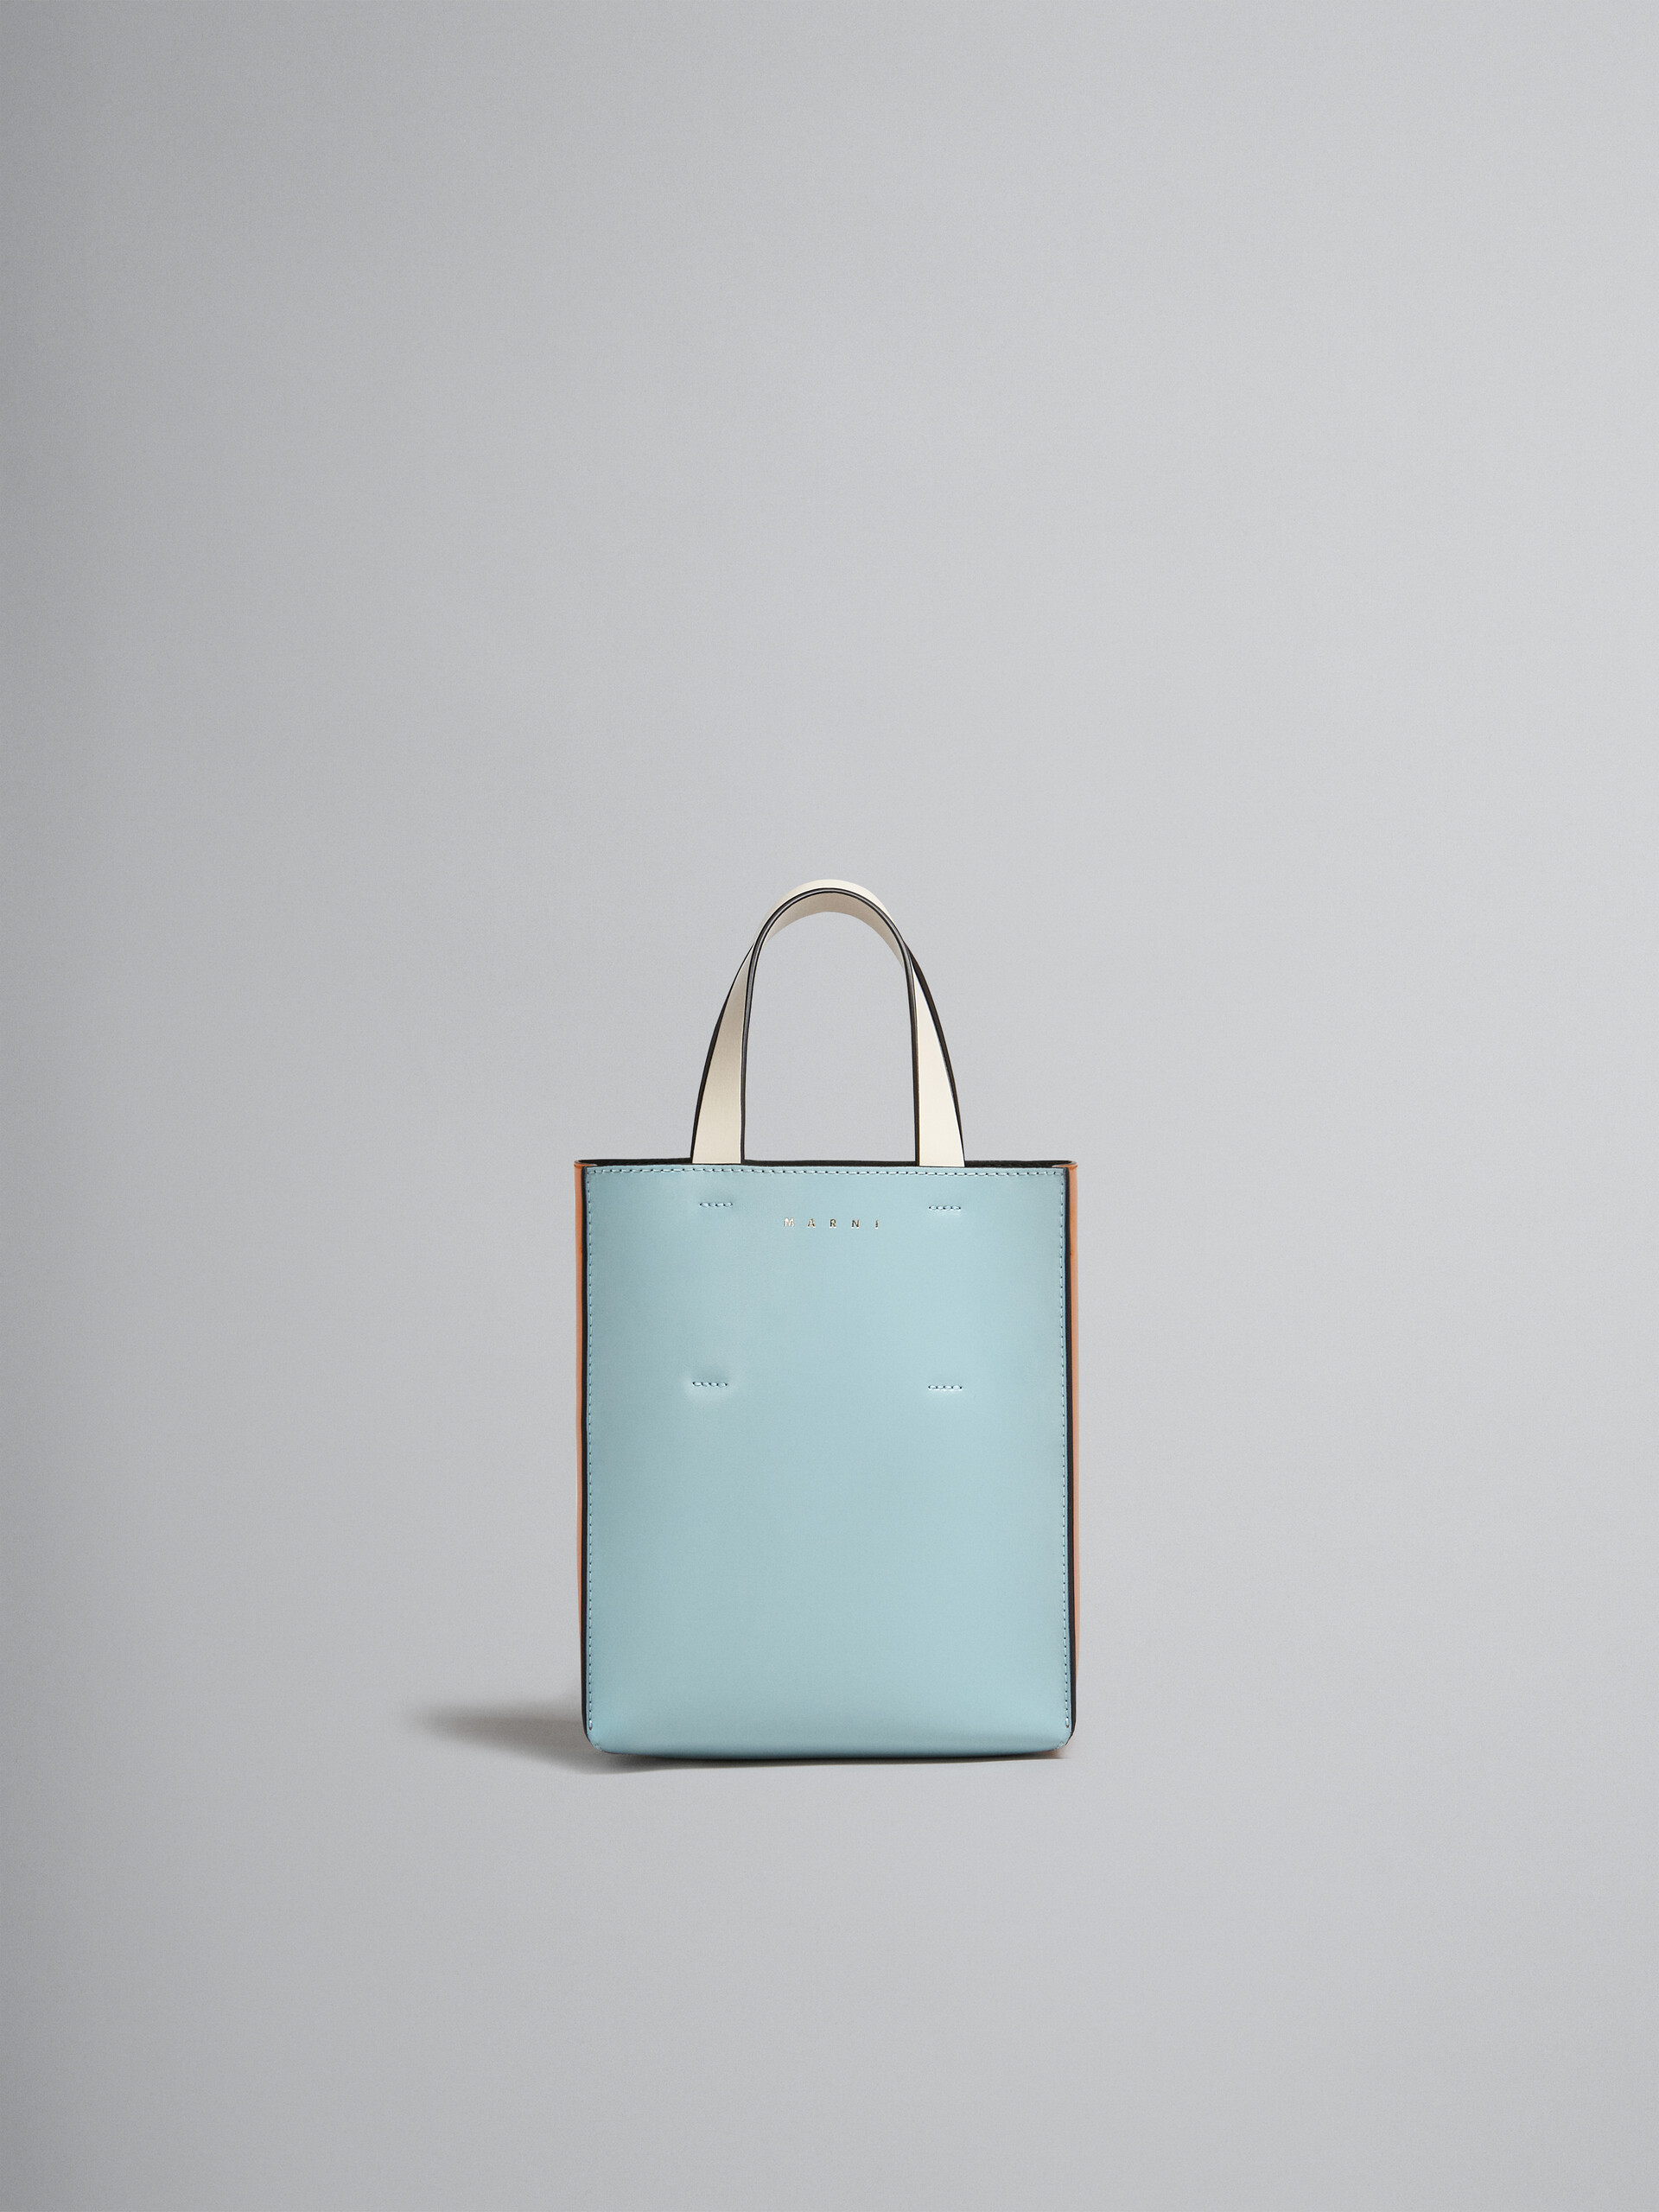 Museo Mini Bag in light blue orange and white leather - Shopping Bags - Image 1